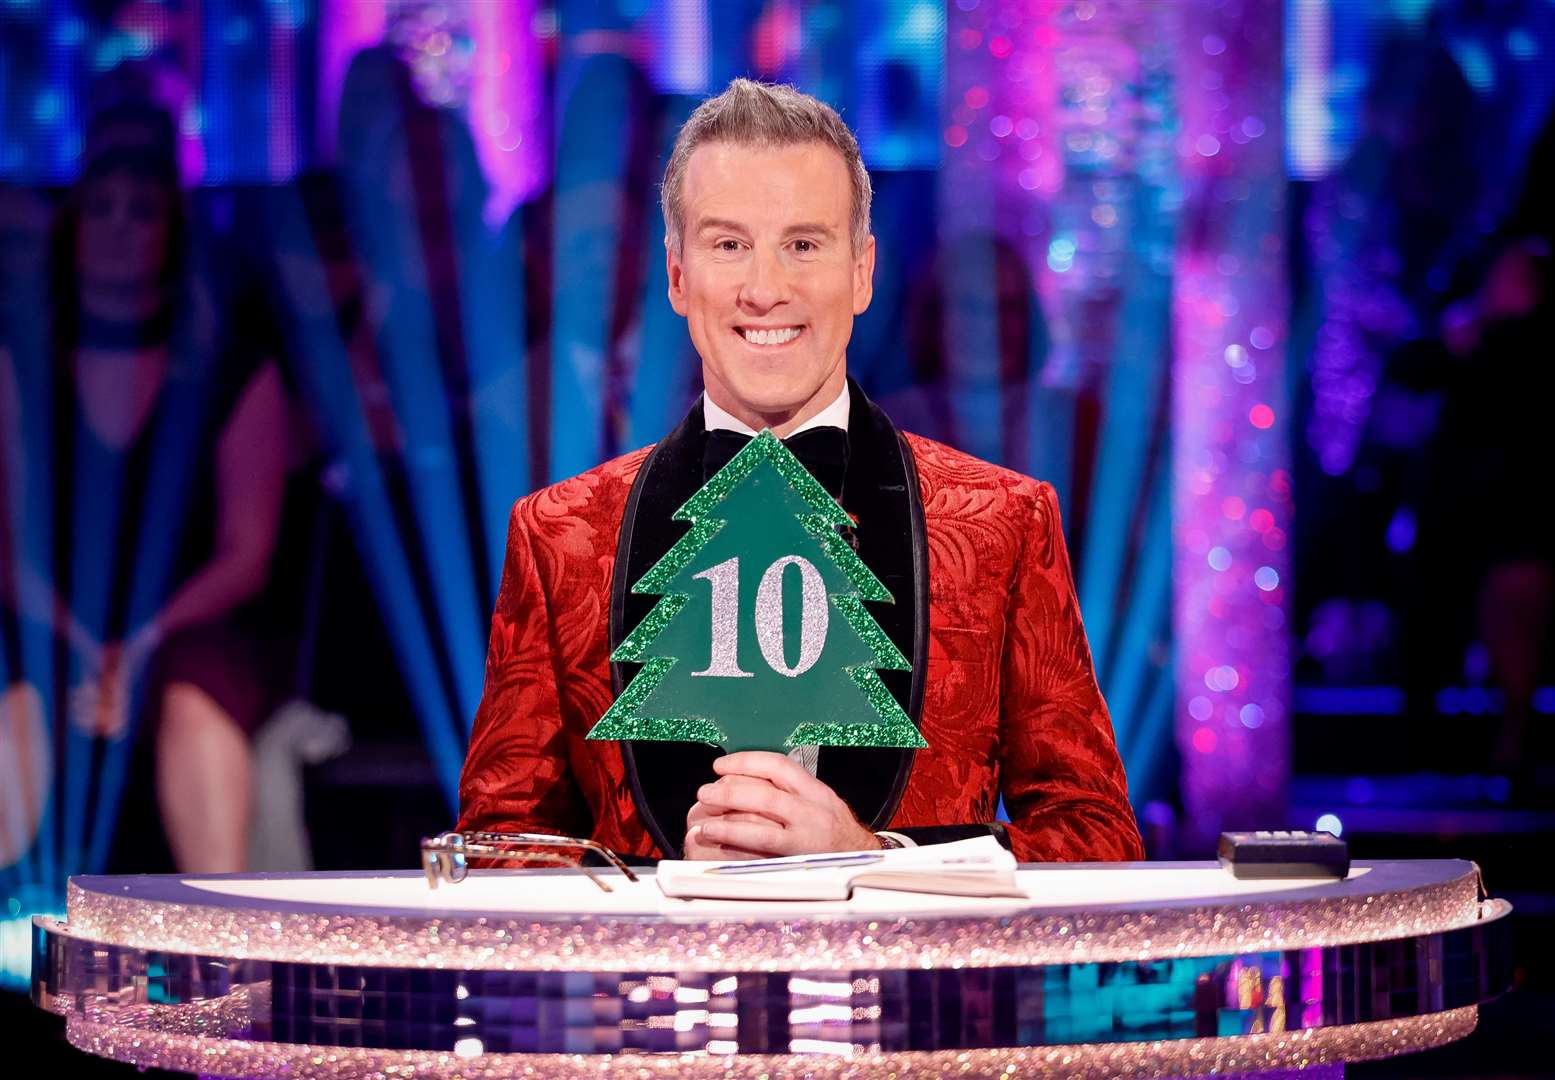 Anton Du Beke on the Strictly Come Dancing Christmas Special. Photo: BBC, Guy Levy